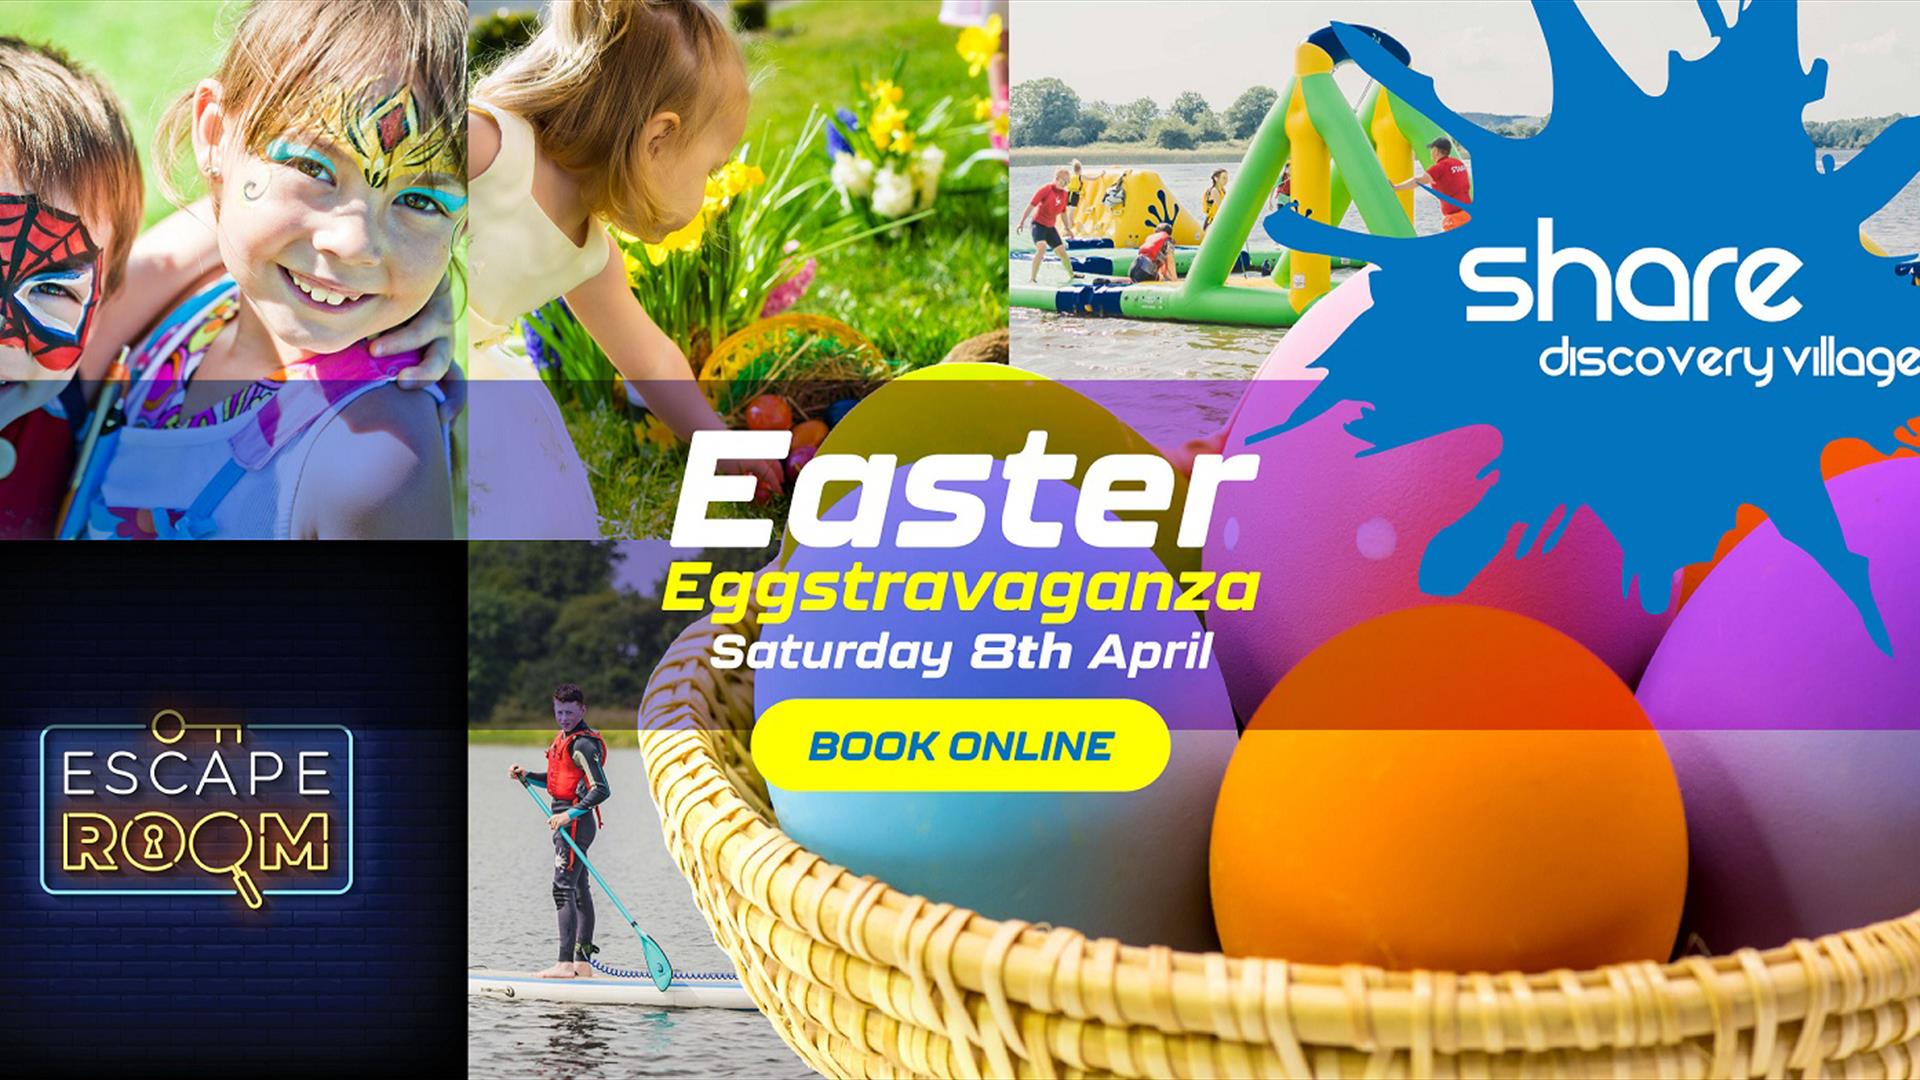 Share Discovery Village Easter Eggstravaganza